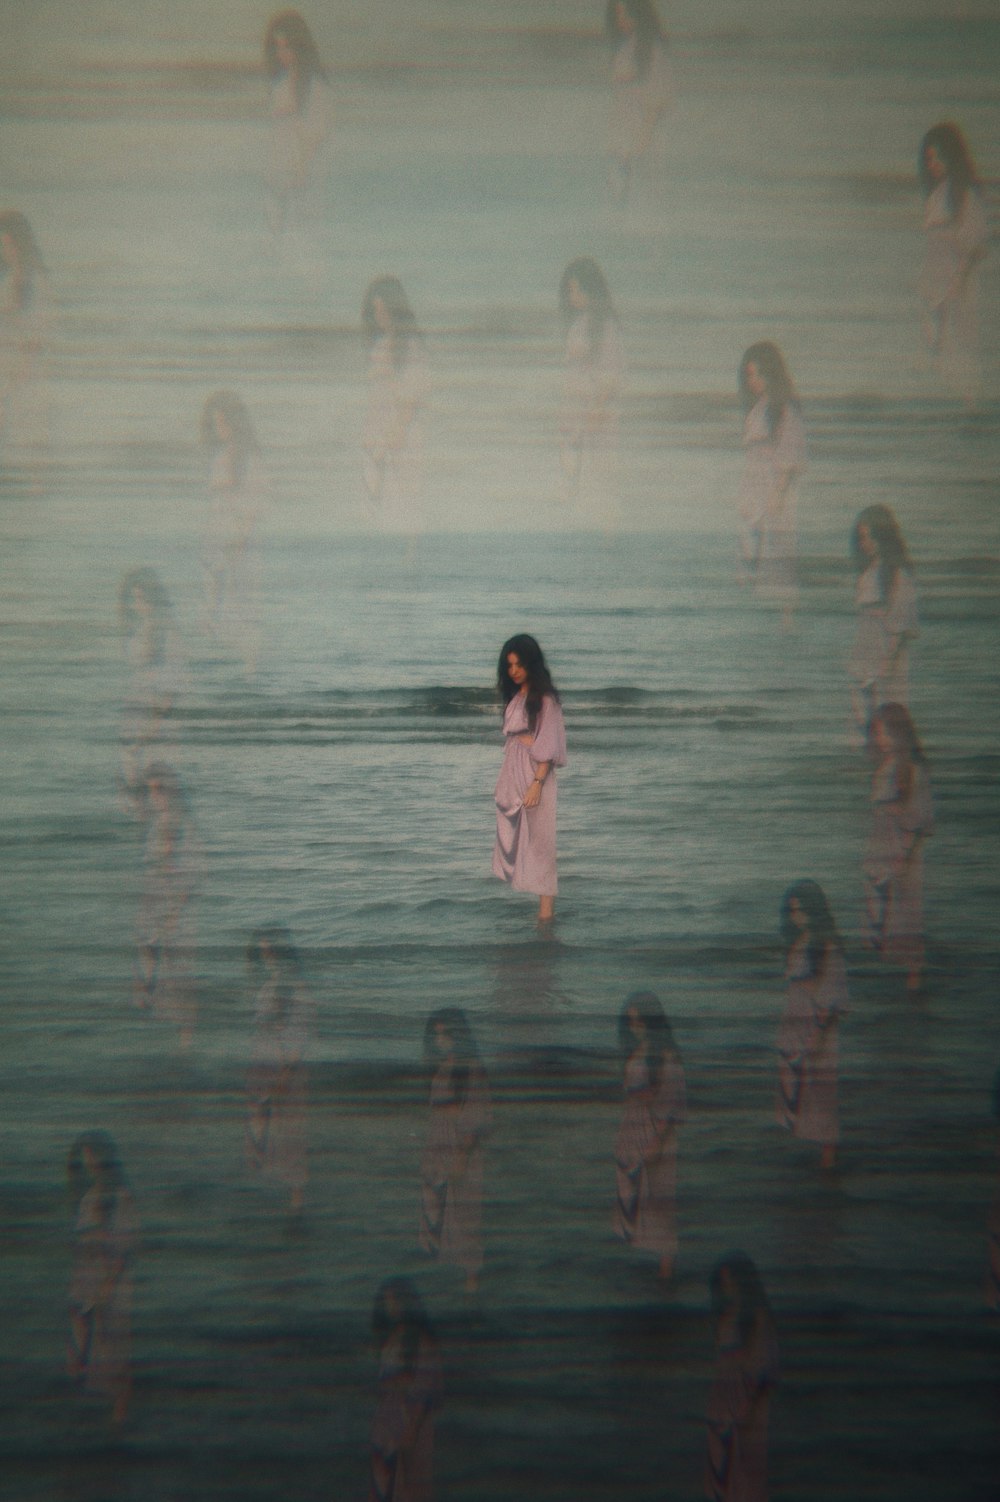 woman in white dress standing on water